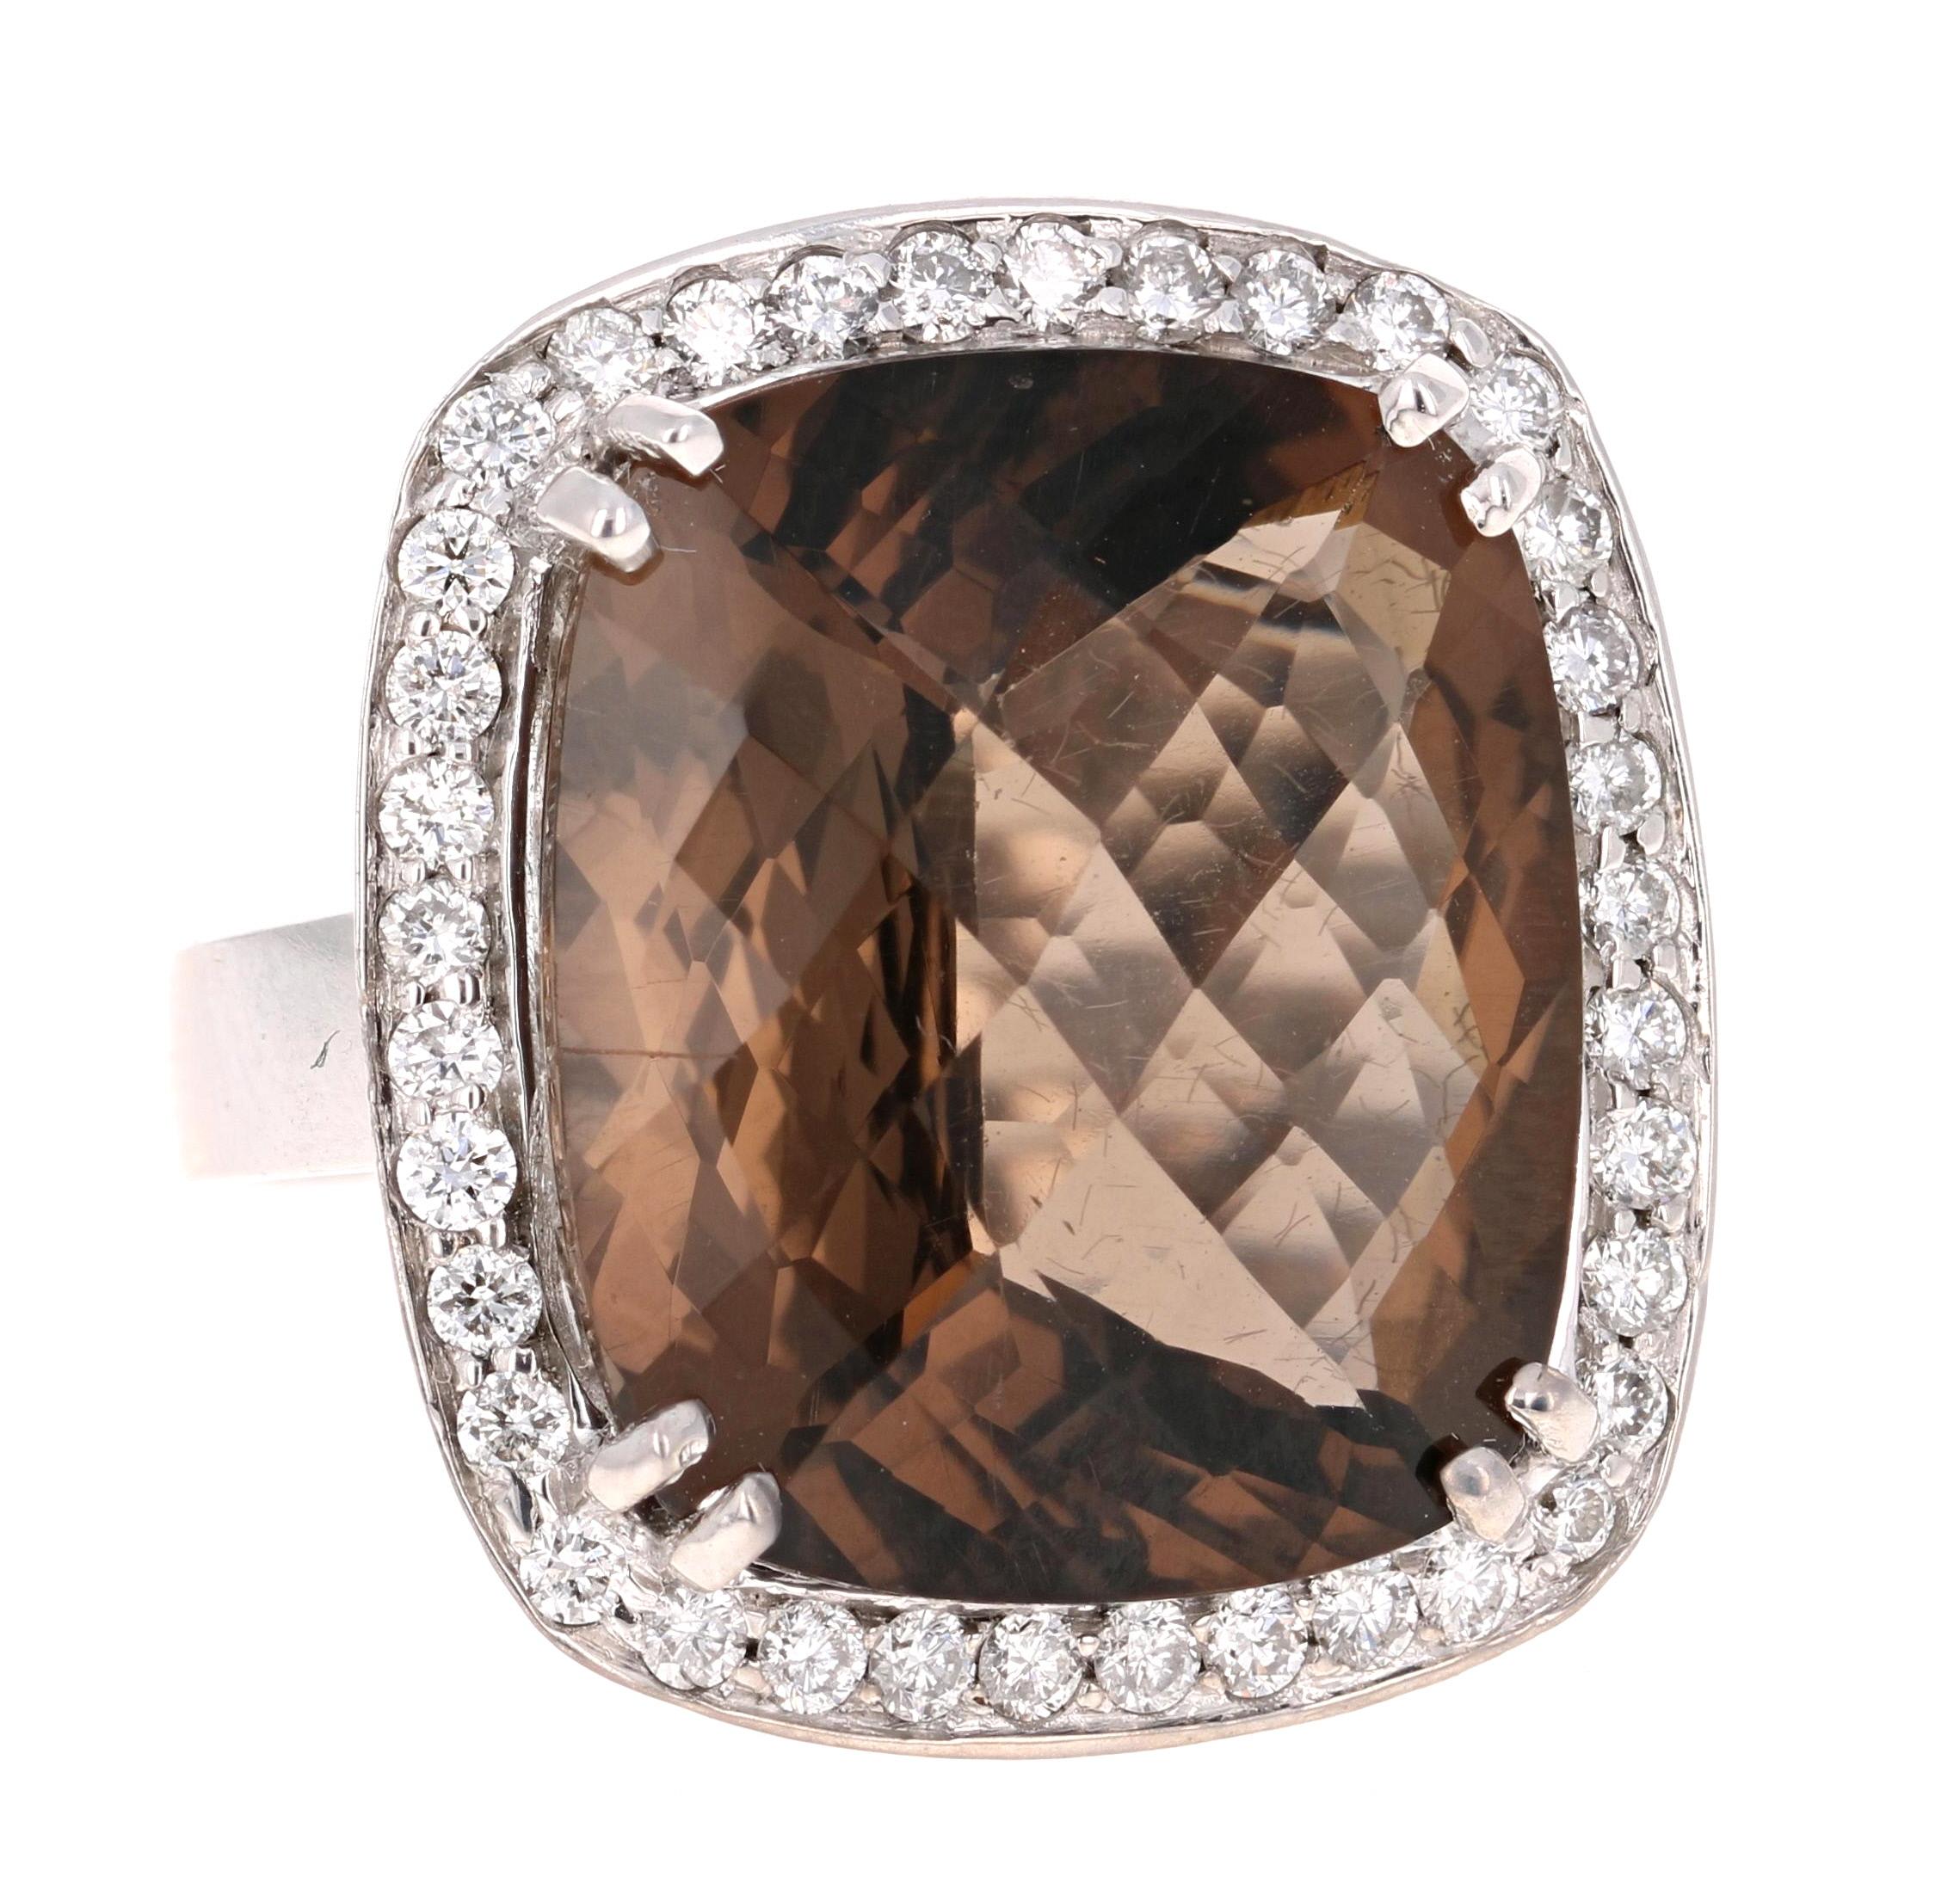 Gorgeous Gorgeous Gorgeous! 

This Smokey Quartz Ring is nothing less than a stunning statement! 

Finely crafted in 14 Karat White Gold this  simple setting brings out the beauty of the 20.29 Carat Smokey Quartz. 

It is surrounded by 36 Round Cut